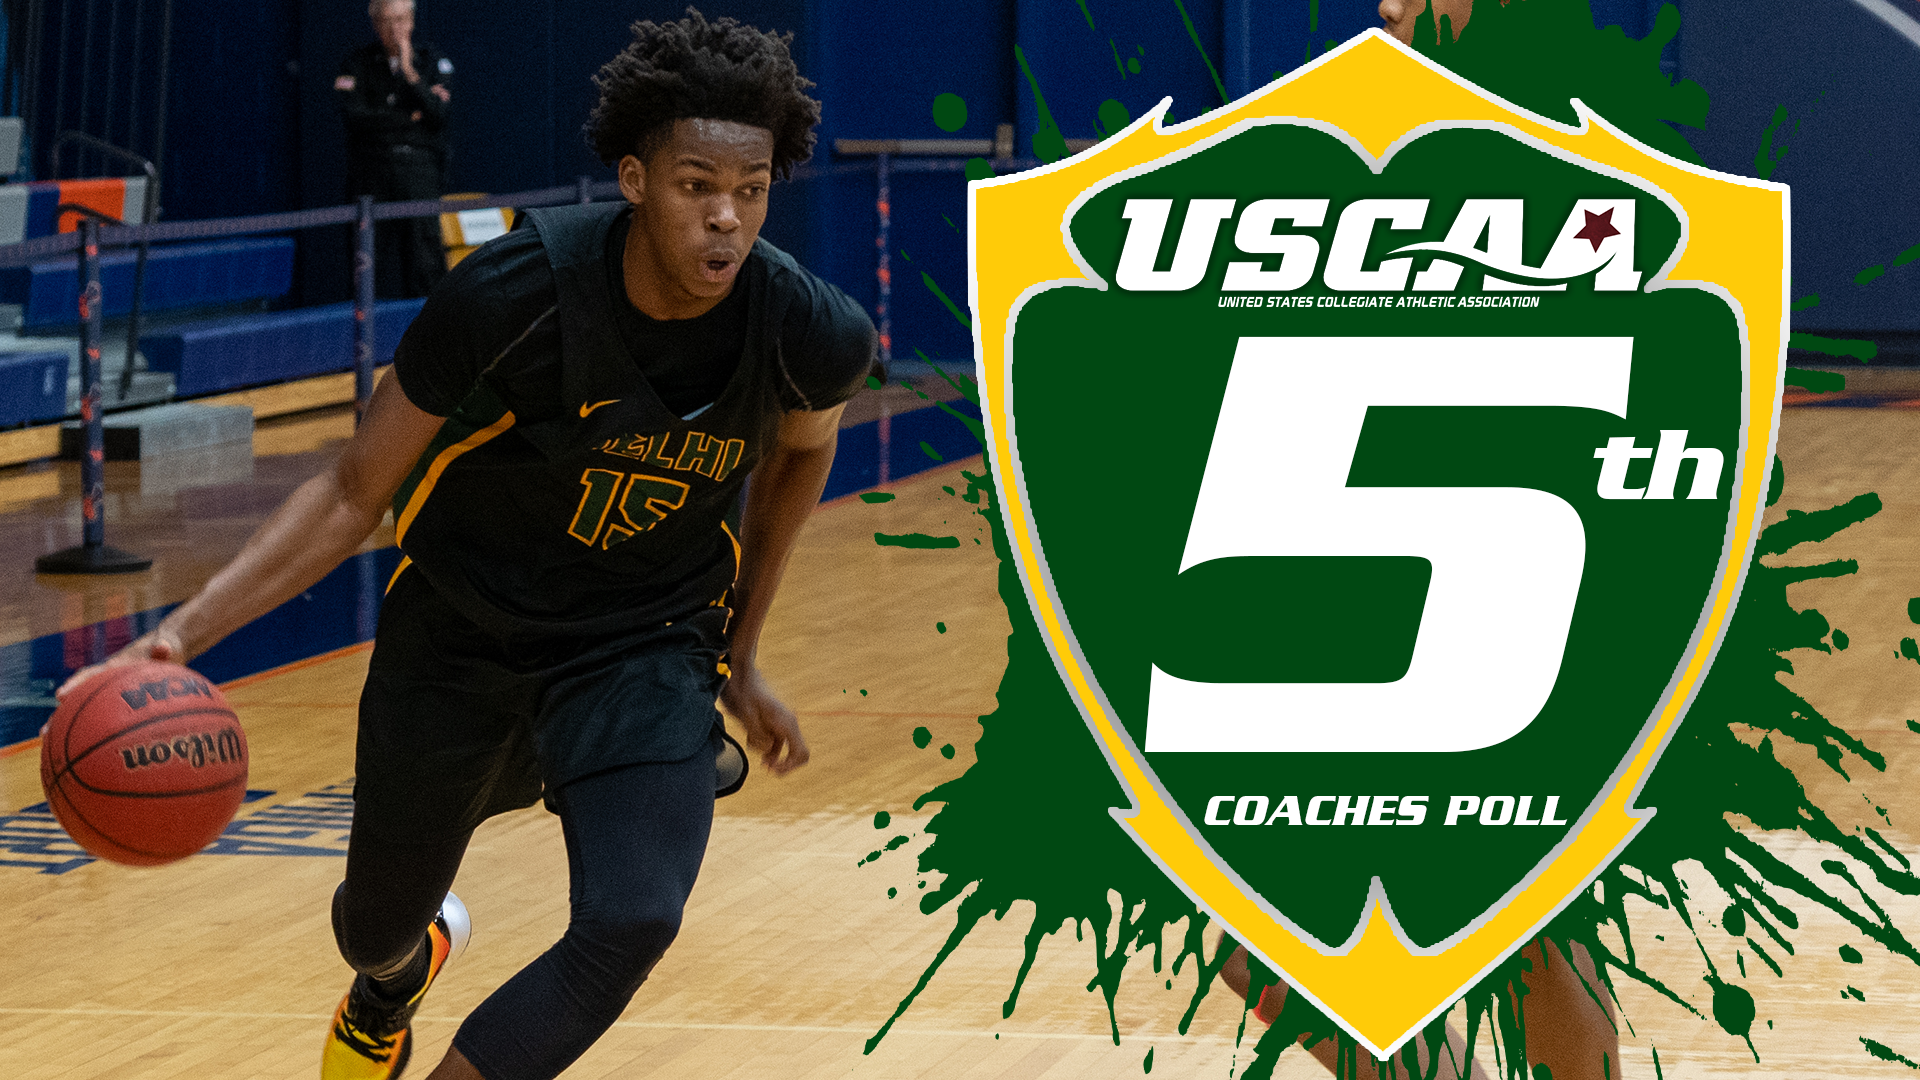 Men's Basketball Fifth in Newest USCAA Coaches Poll